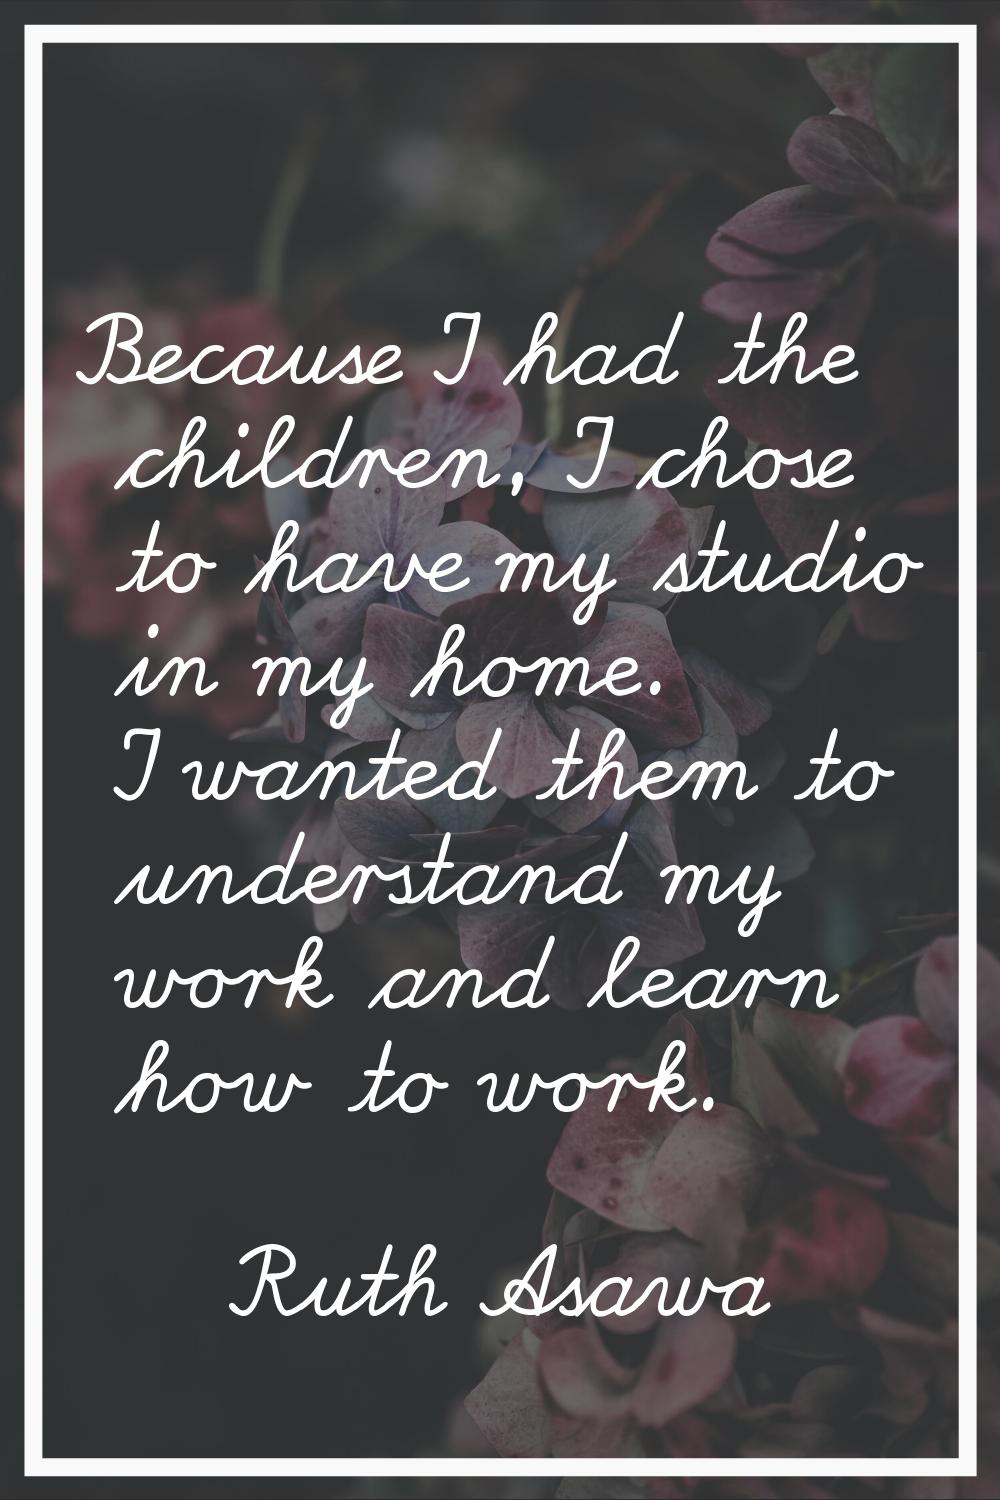 Because I had the children, I chose to have my studio in my home. I wanted them to understand my wo